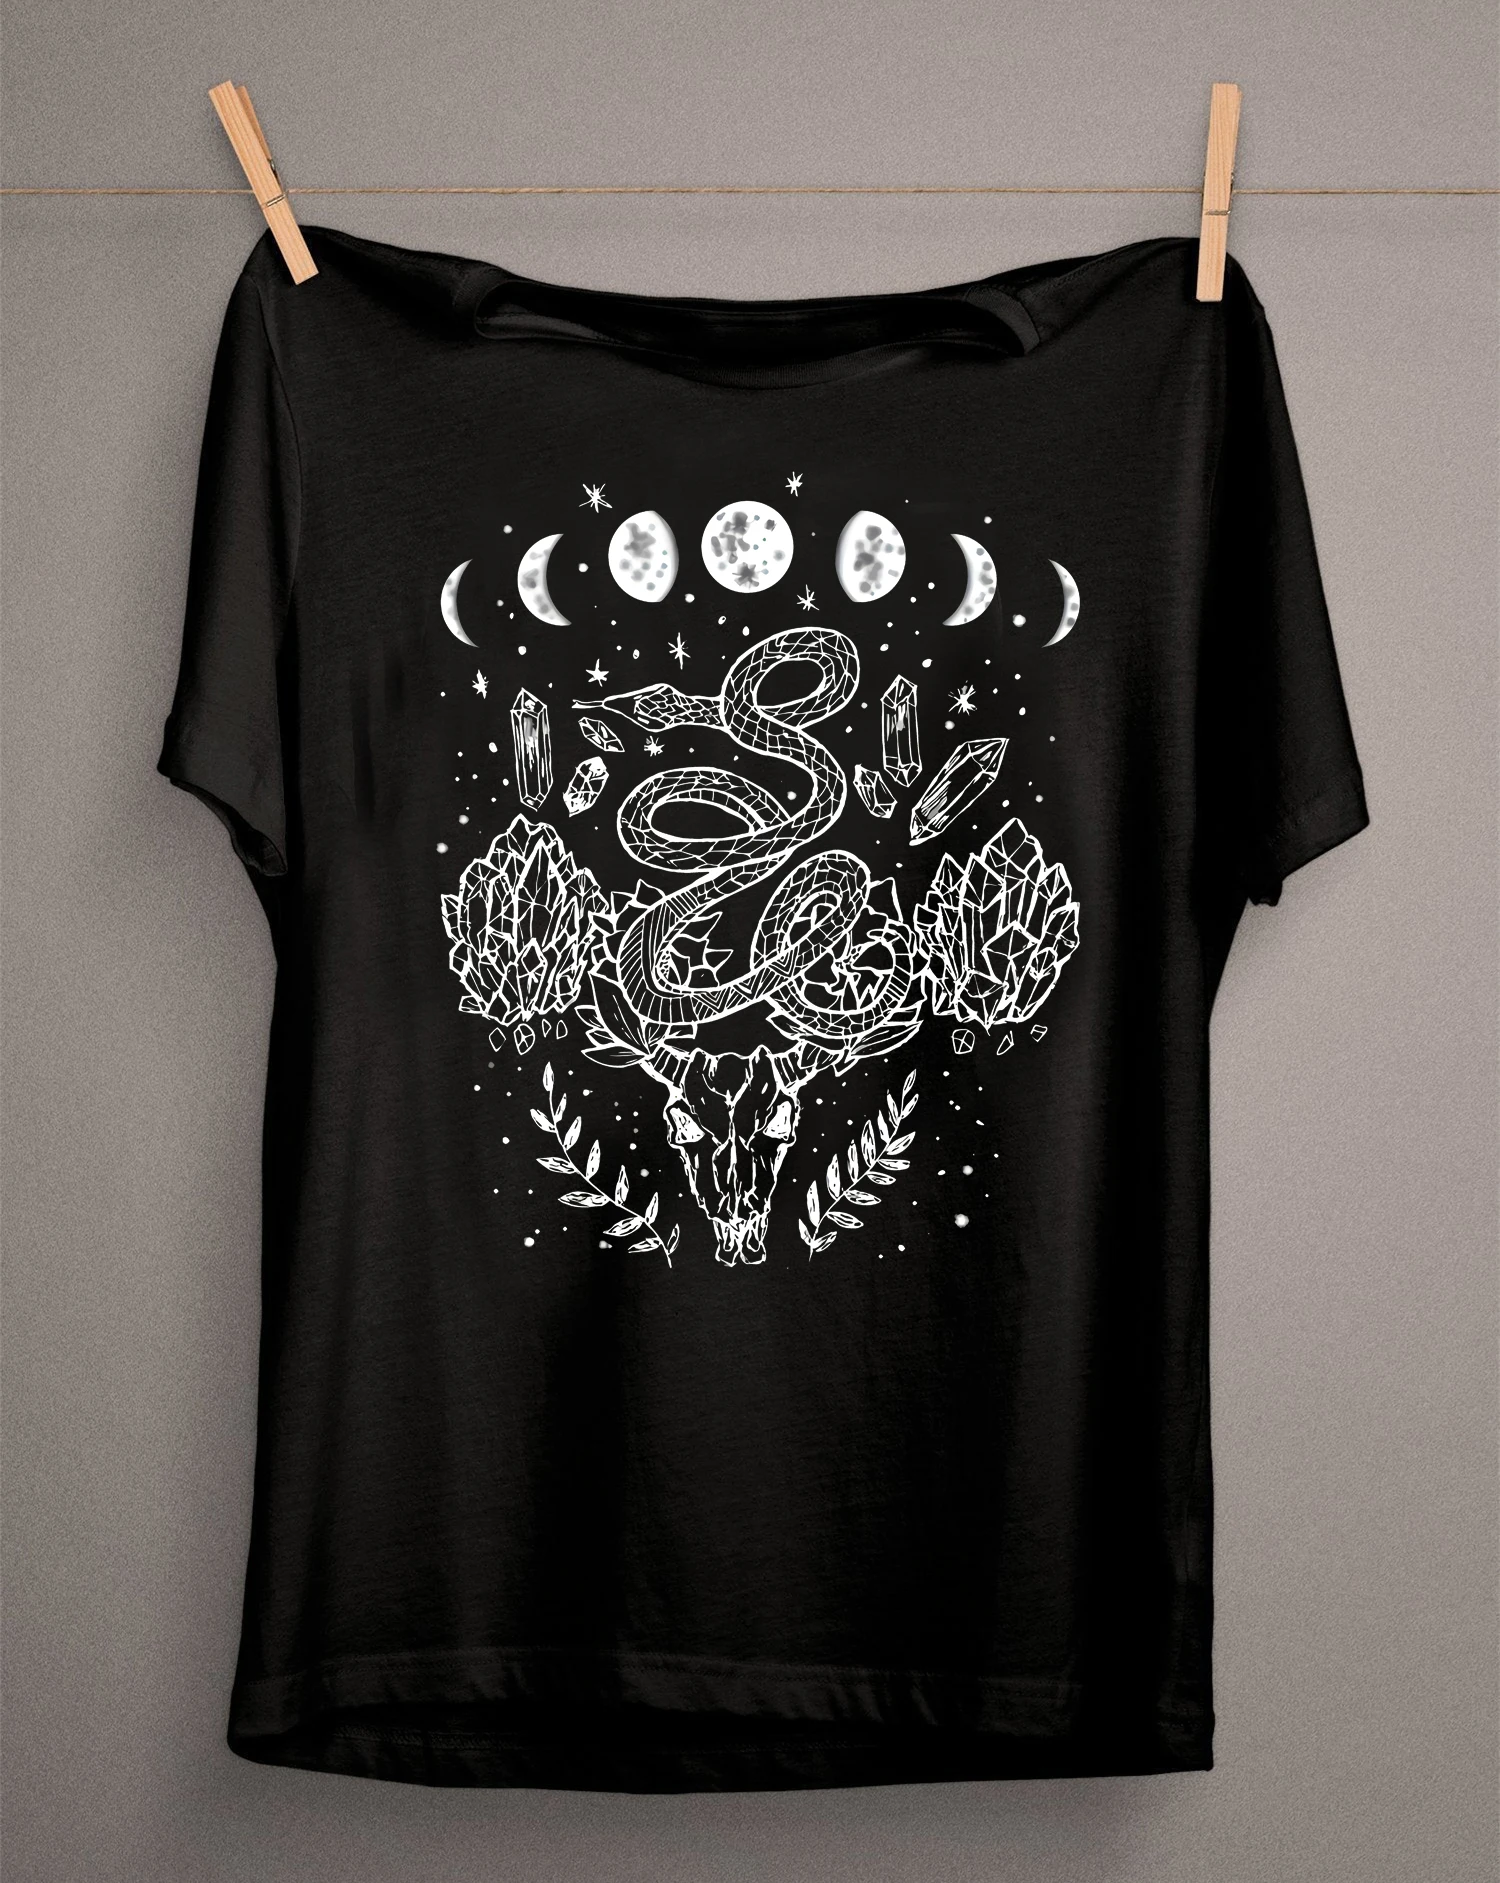 Crystals Moon Floral Beads Subtle Witchcraft Tee Shirt Unisex All Genders Soft Feel Nu Goth Artist Gothic Artsy Witchy MTcoffinz